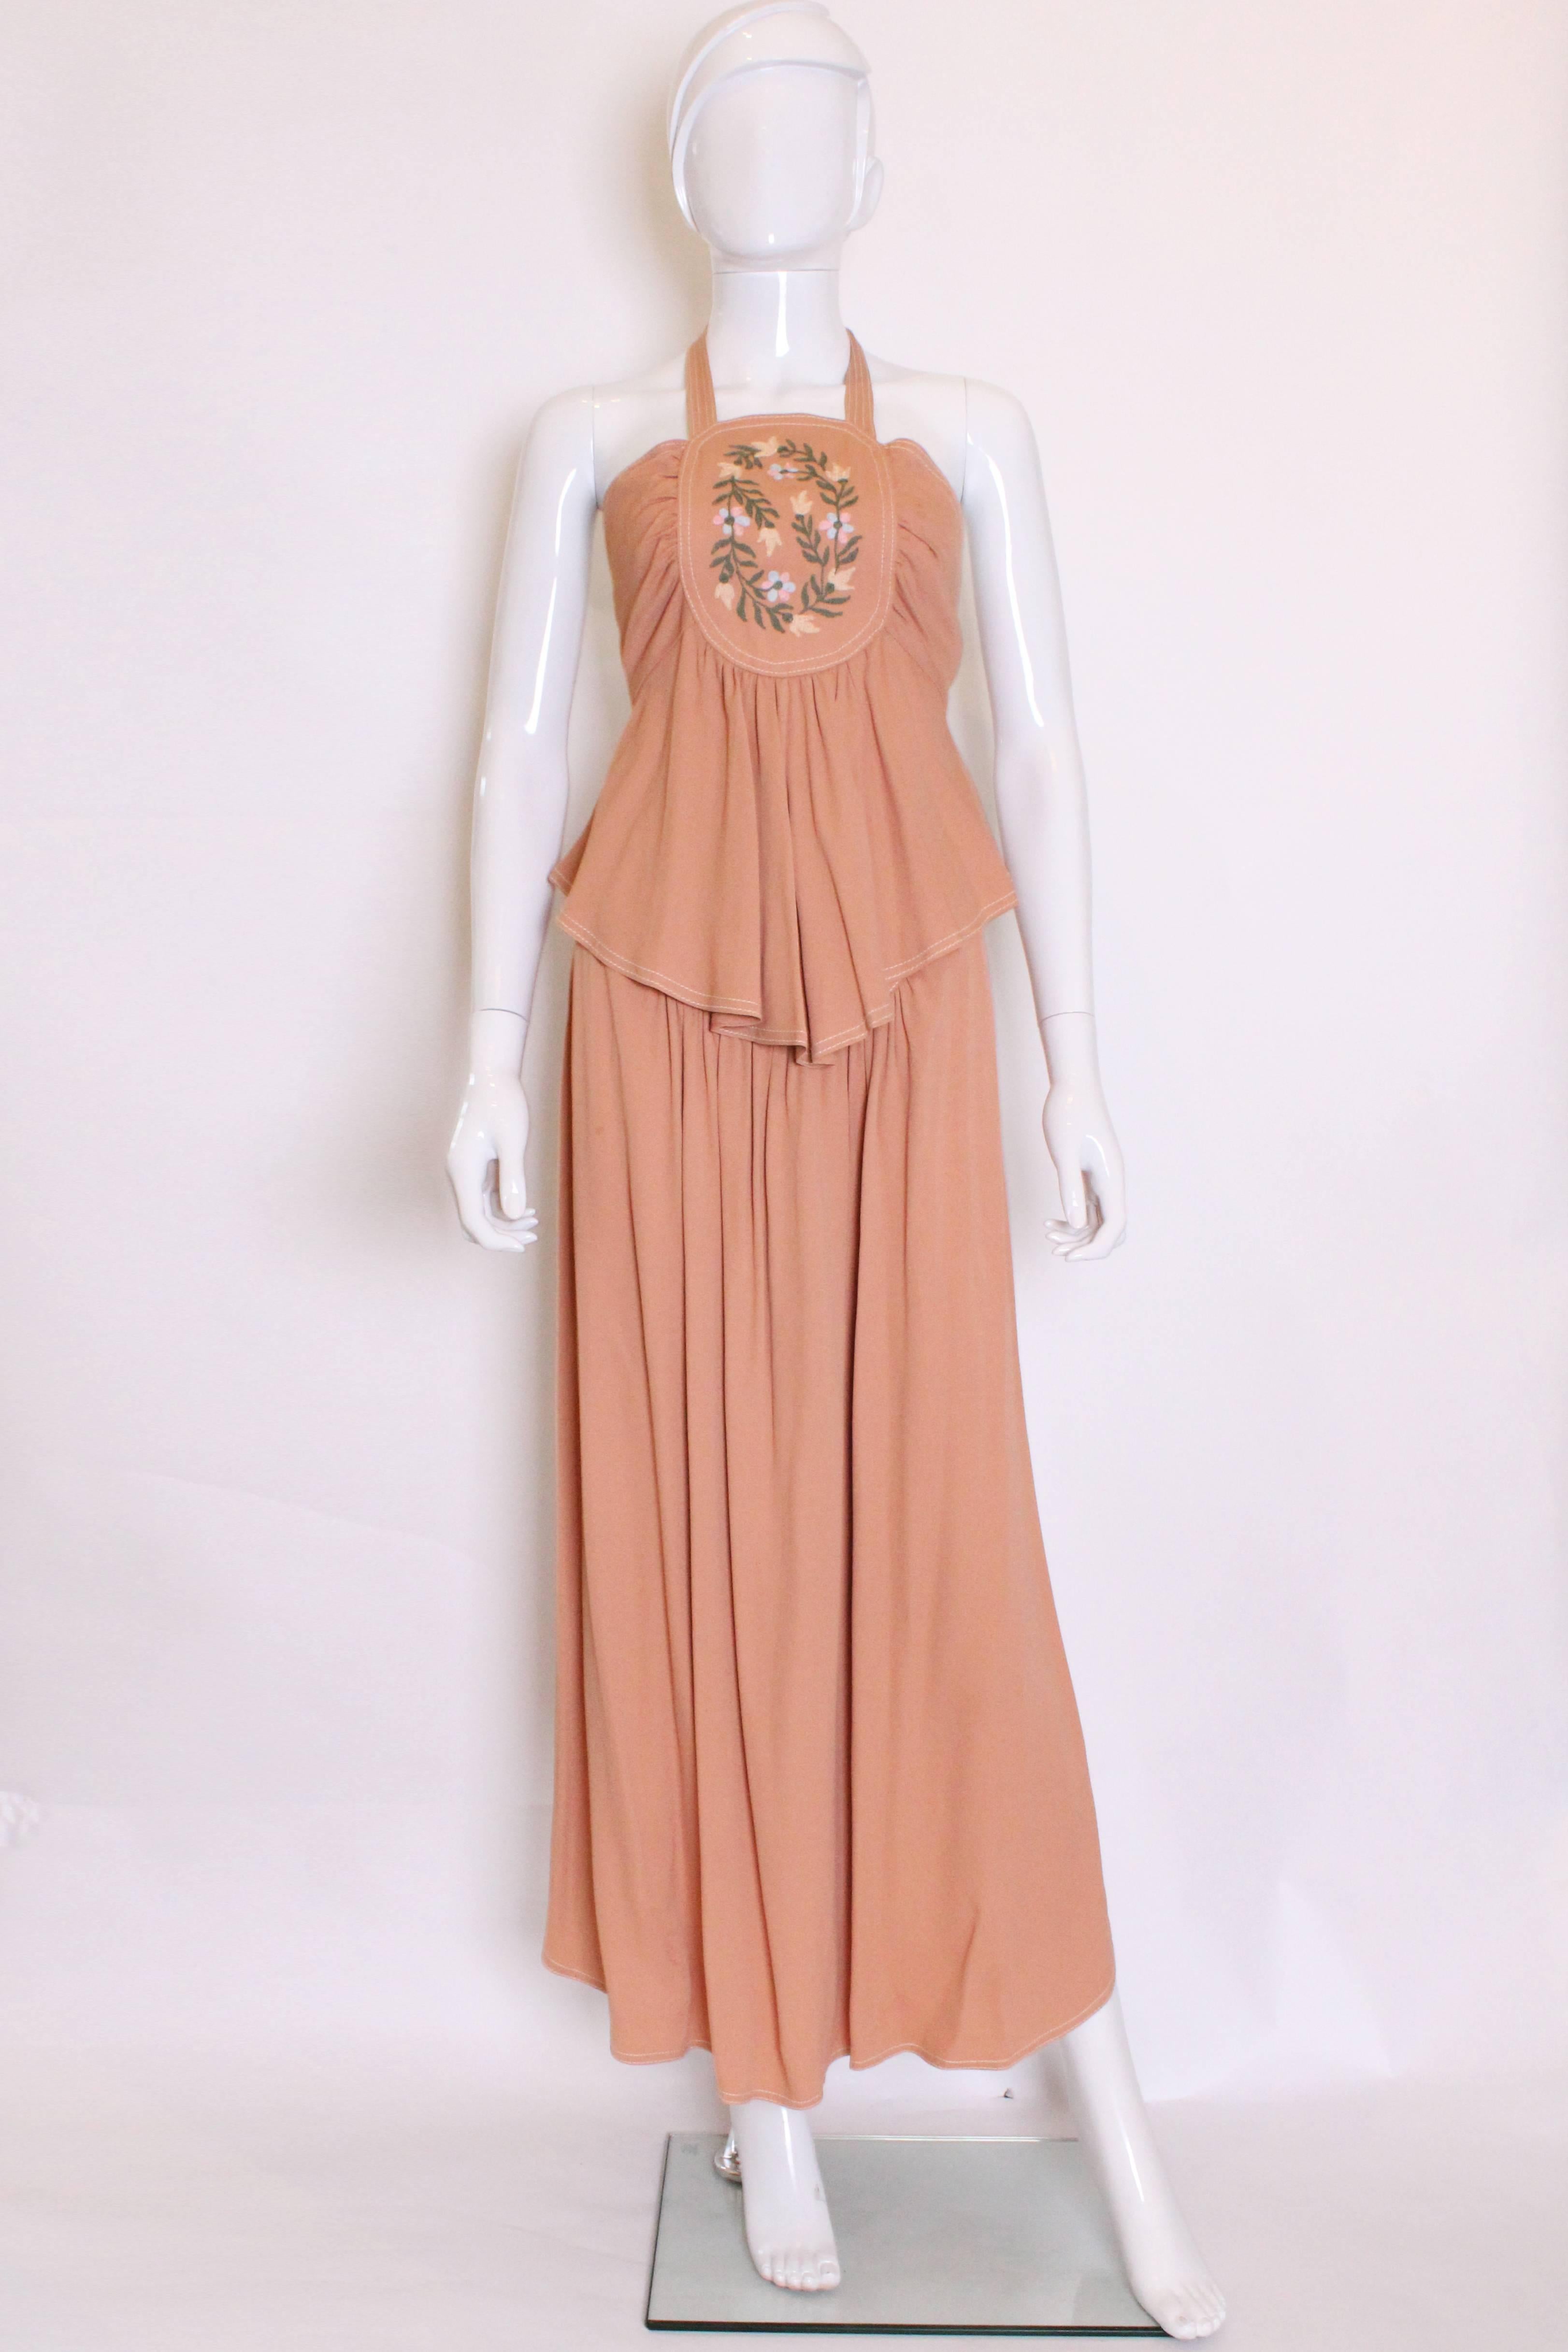 A great outfit by 1970s British designer Bill Gibb. In a peach/buff colour this outfit is a great addition to your summer wardrobe.
The top has a pretty embroidered central panel, in a floral design.There is gathering surrounding the panel ,and a